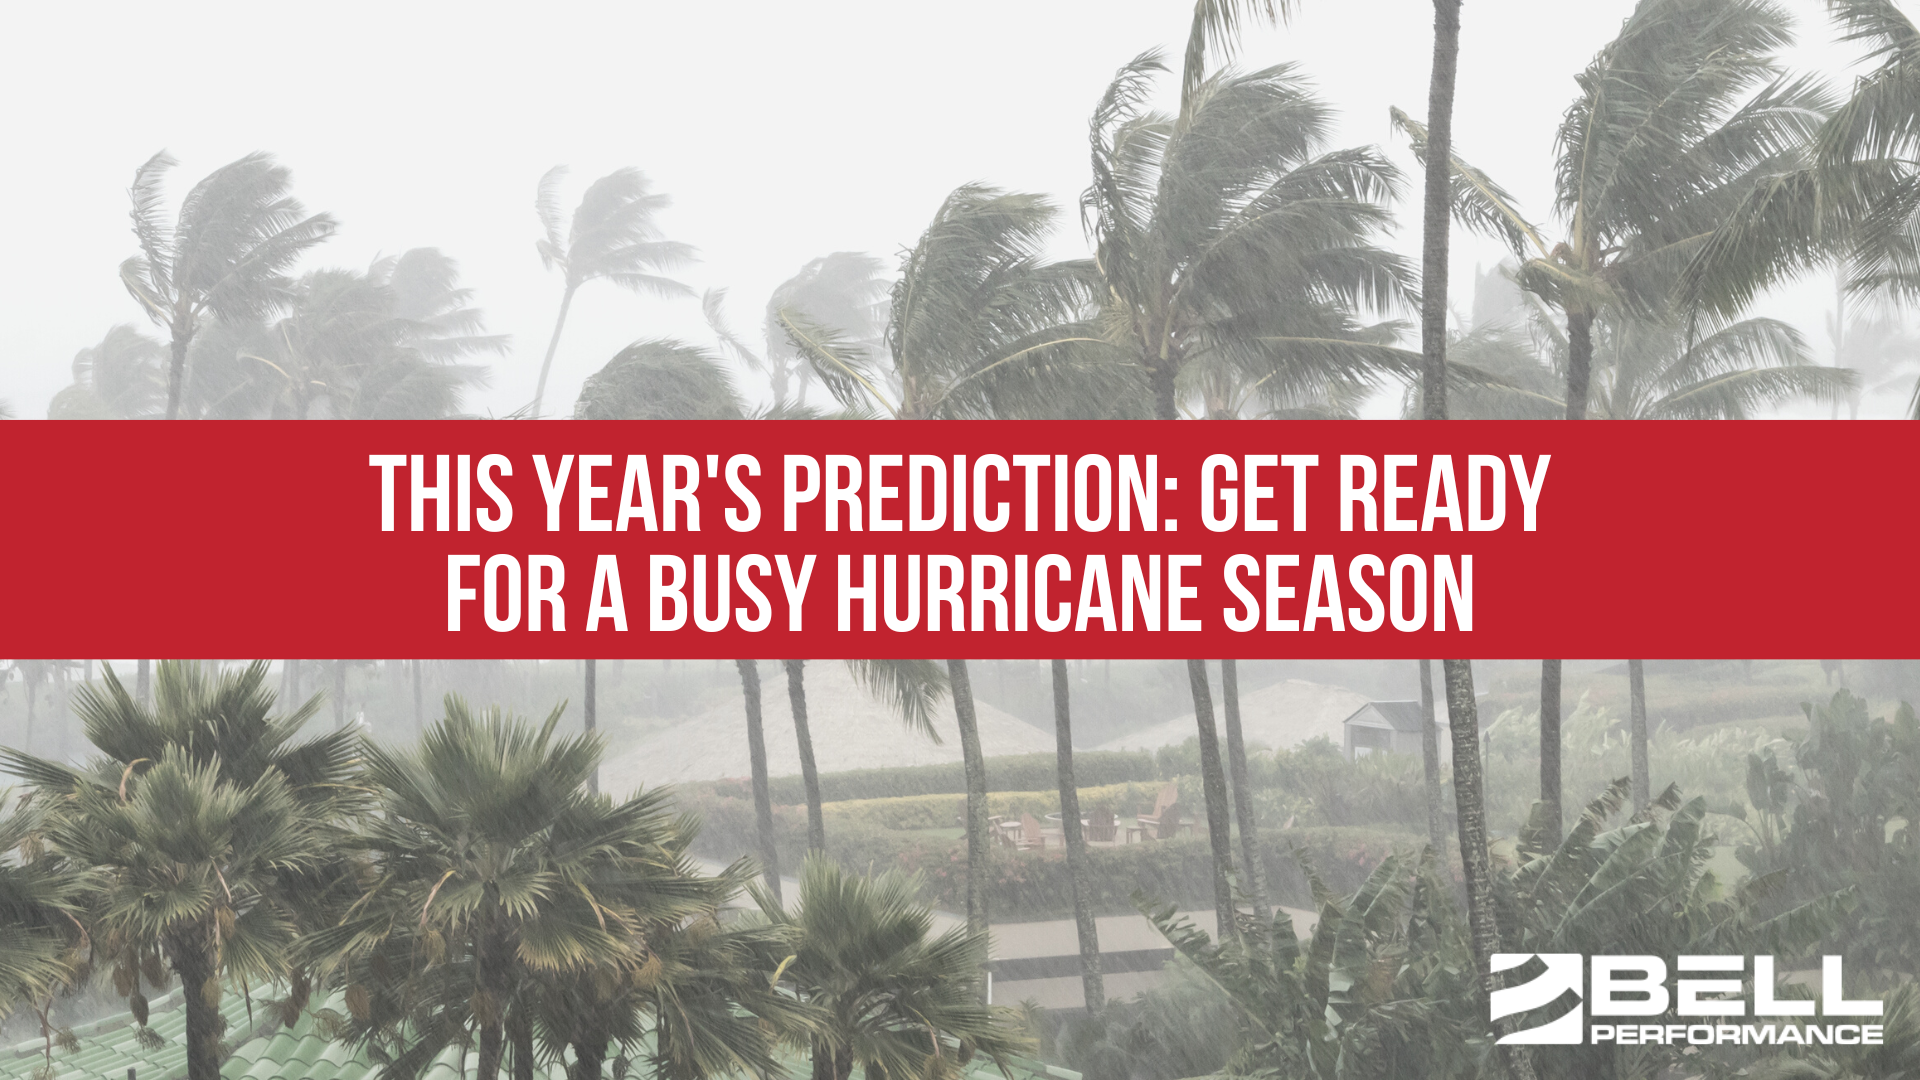 This Year's Prediction: Get Ready for a Busy Hurricane Season